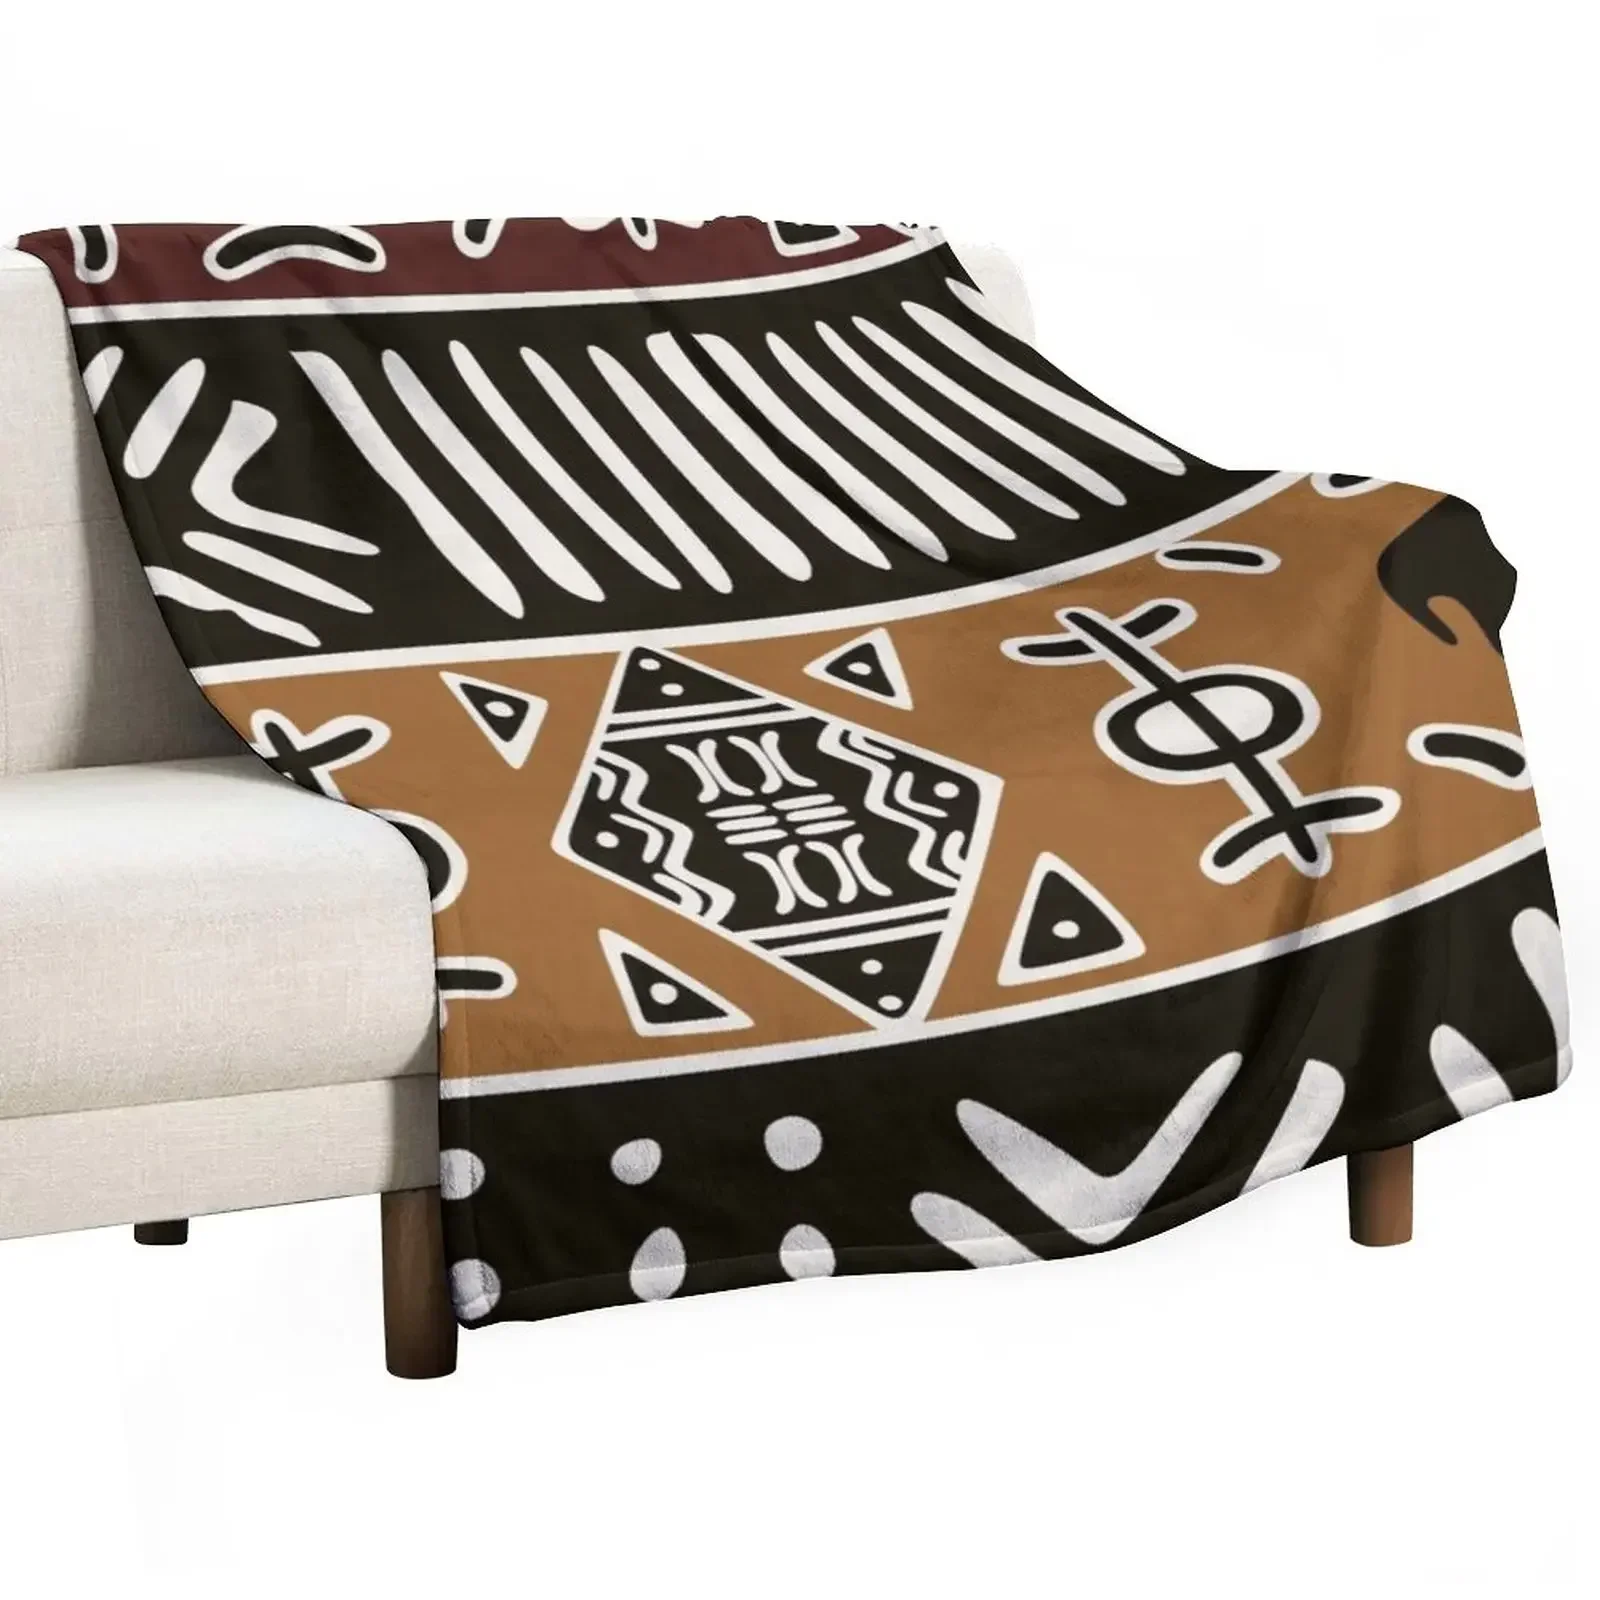 

African mud cloth with elephants Throw Blanket Quilt Fashion Sofas Multi-Purpose Blankets